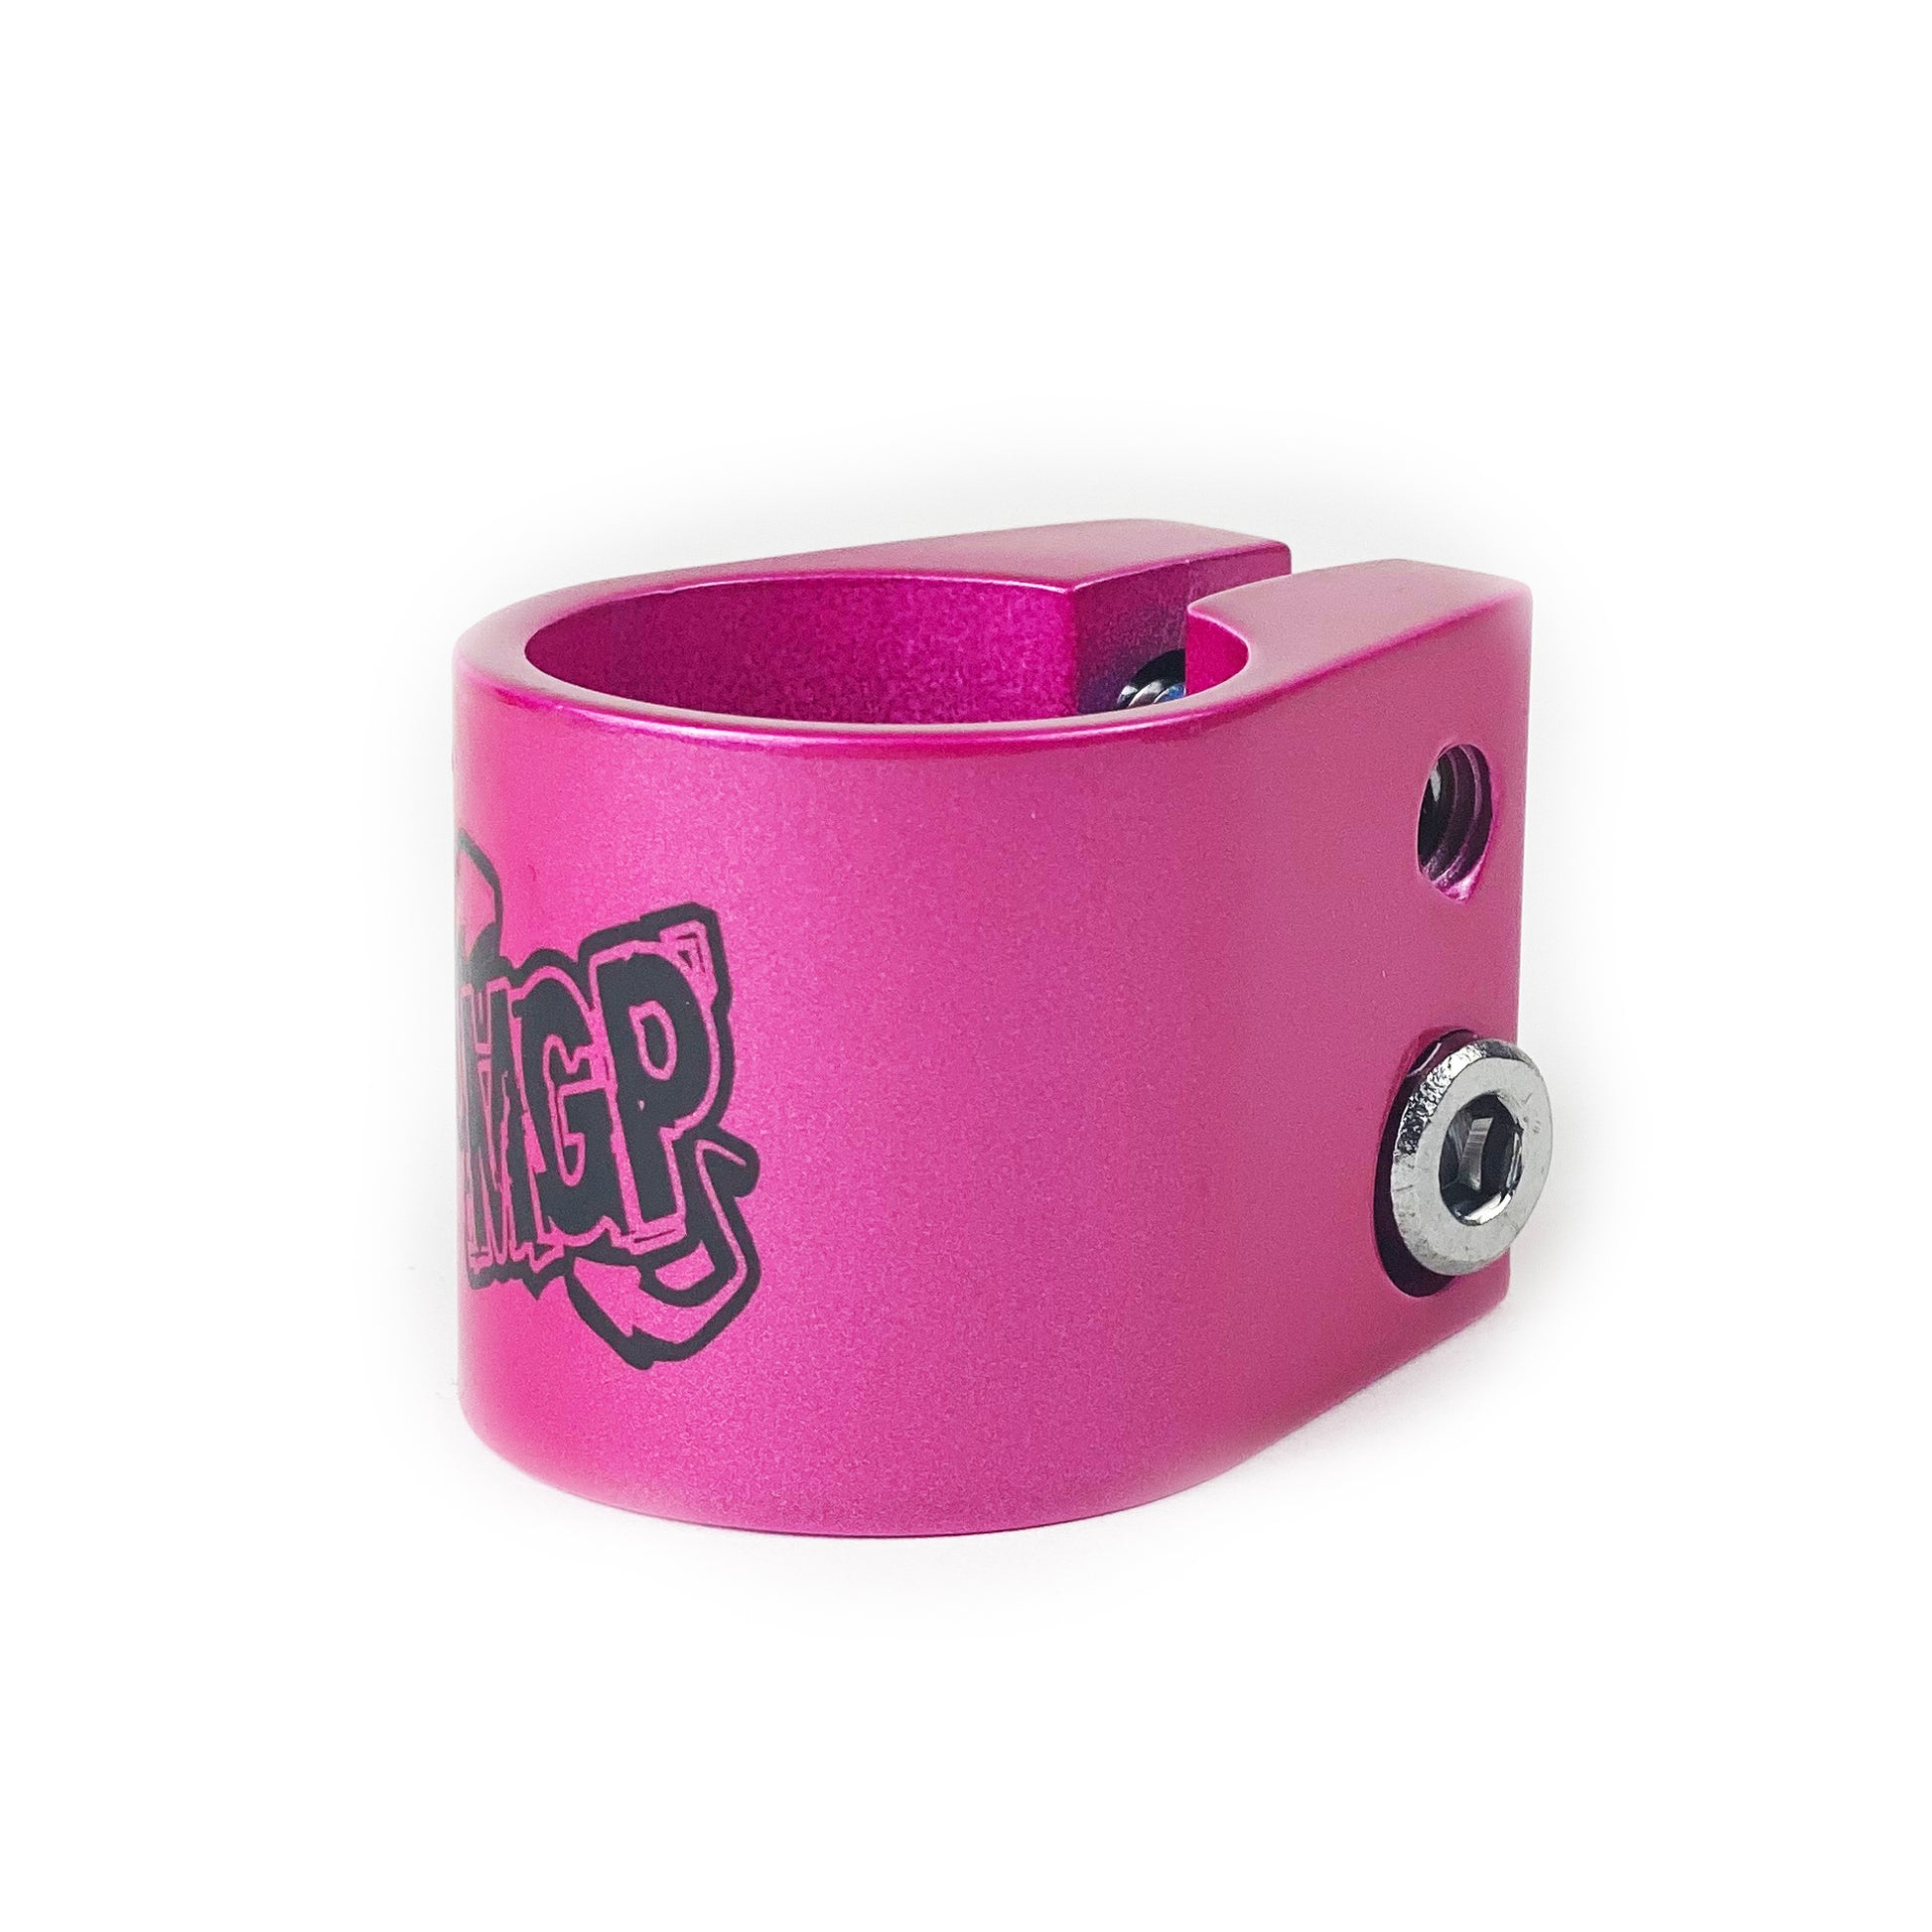 MGP MADD Double Clamp - Pink - Prime Delux Store